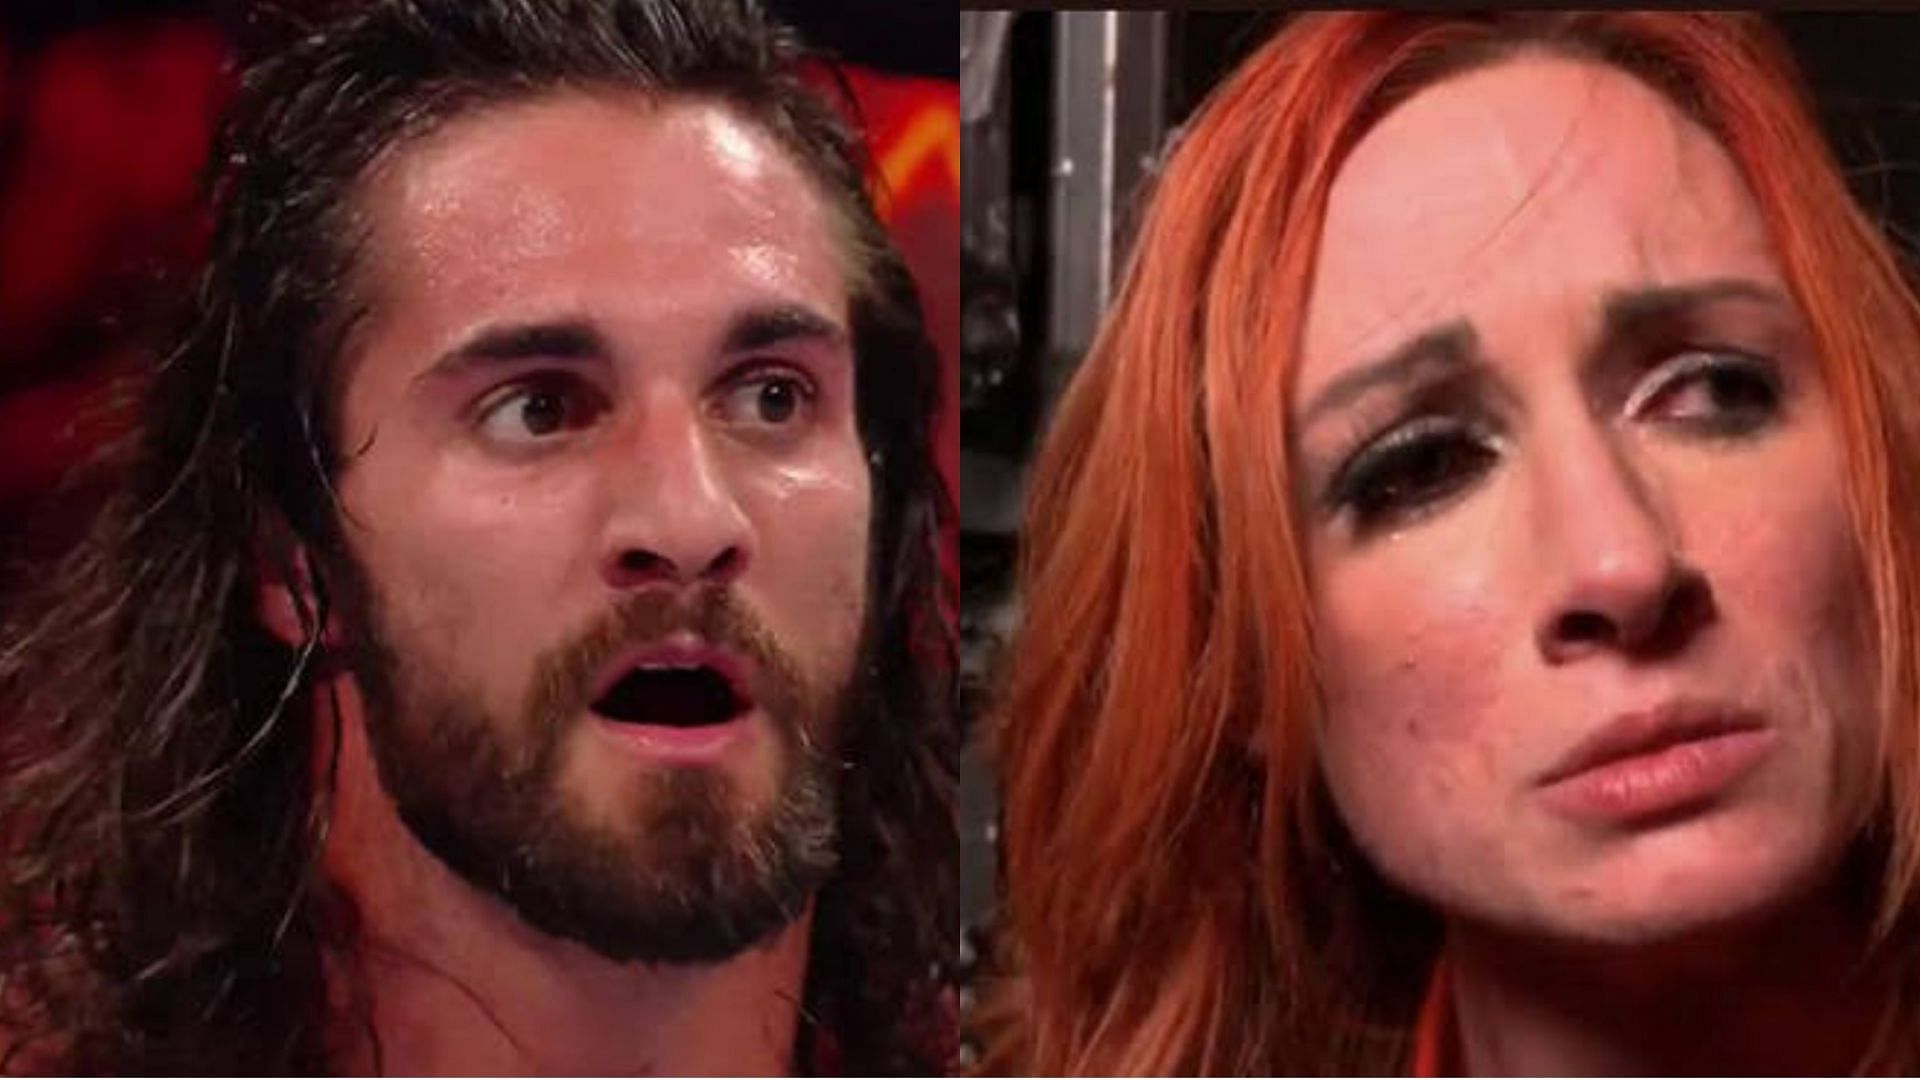 Seth Rollins is stunned after seeing what happened to Lynch on WWE Raw.